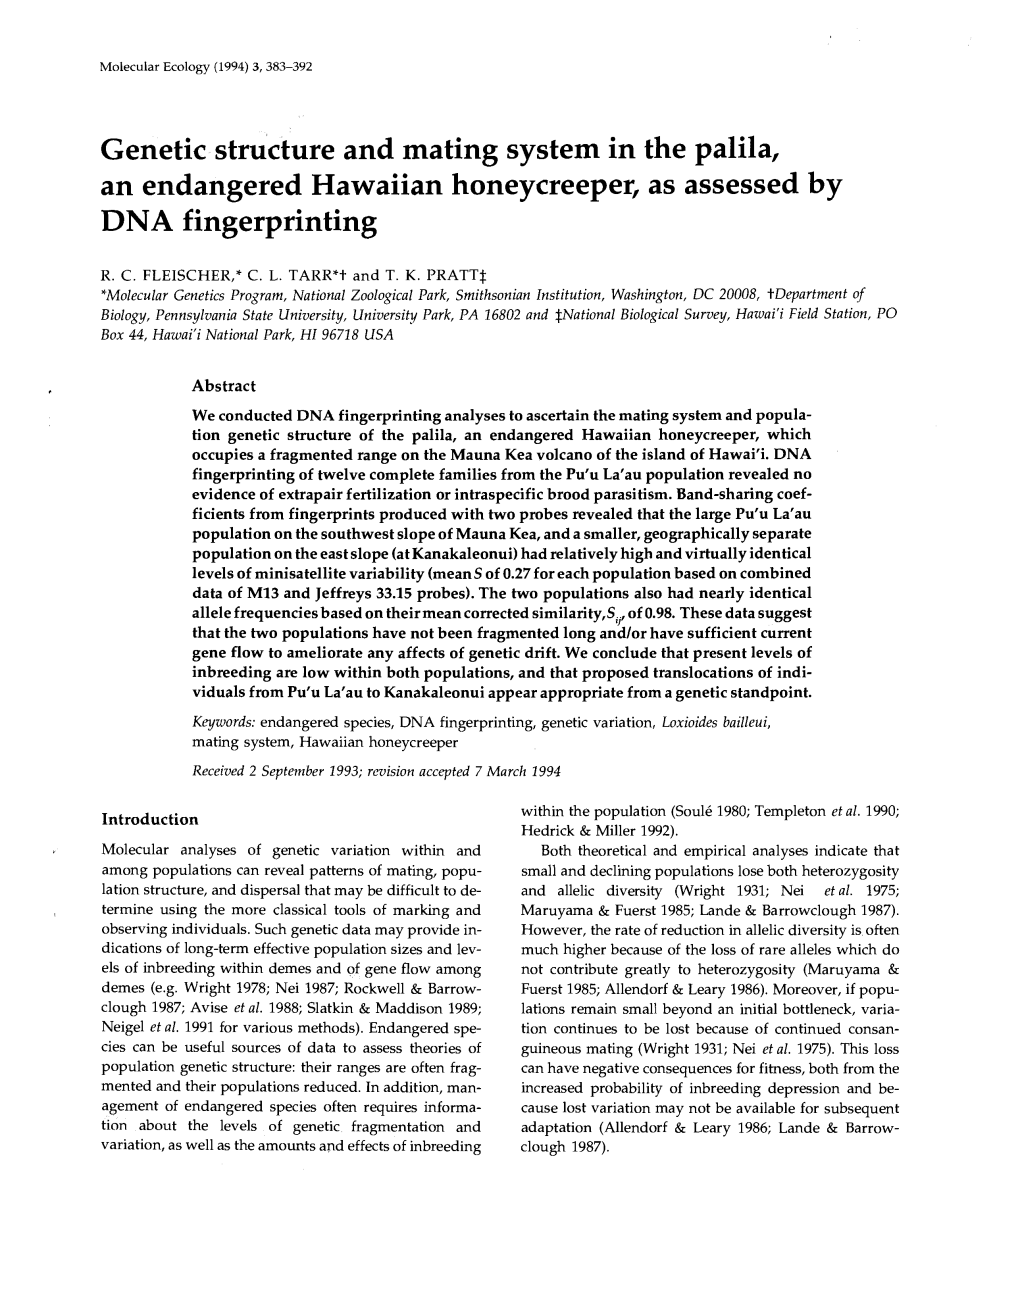 Genetic Structure and Mating System in the Palila, an Endangered Hawaiian Honeycreeper, As Assessed by DNA Fingerprinting